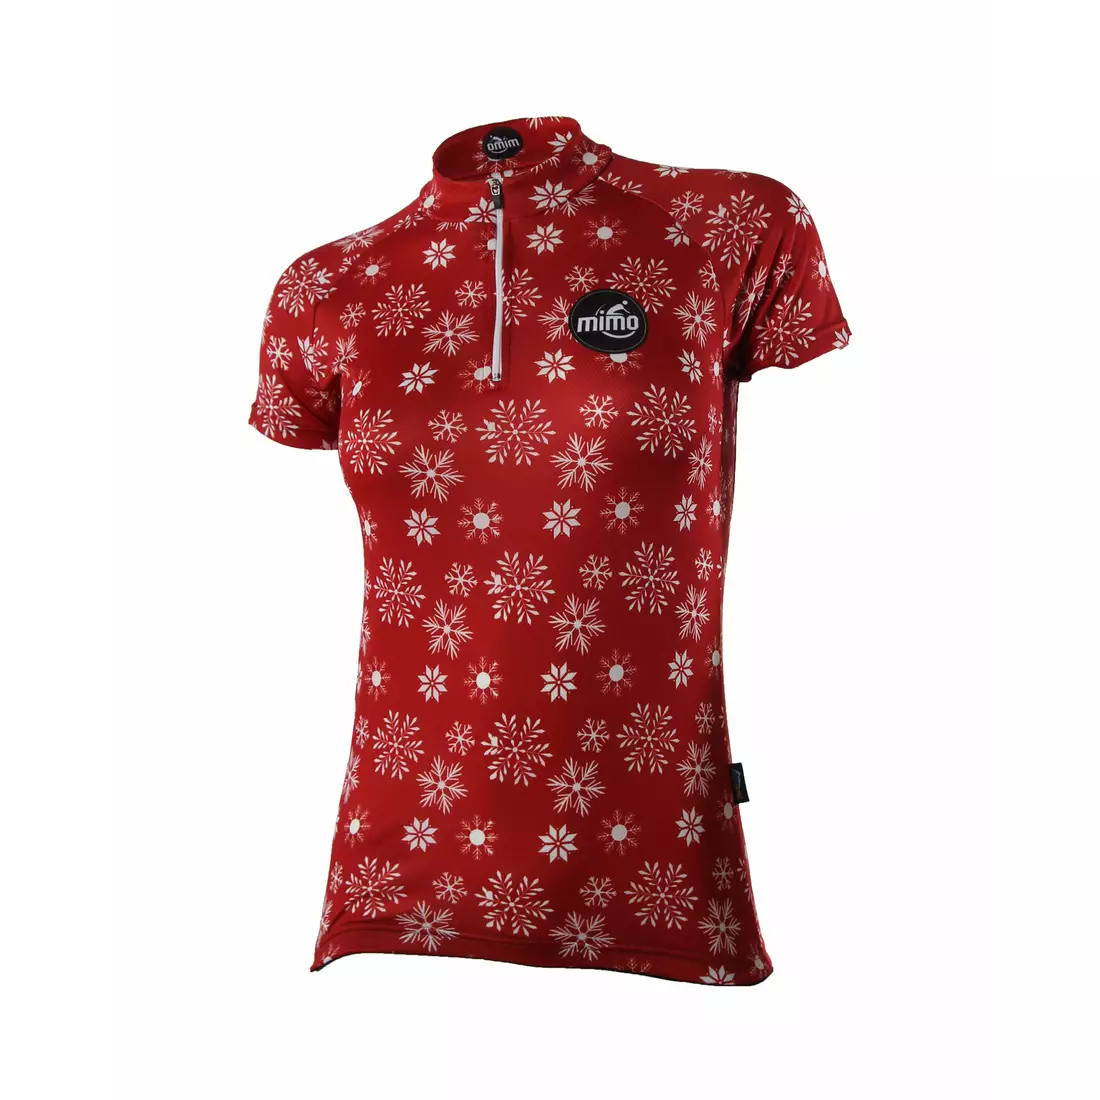 MikeSPORT DESIGN SNOWFLAKE women's cycling jersey